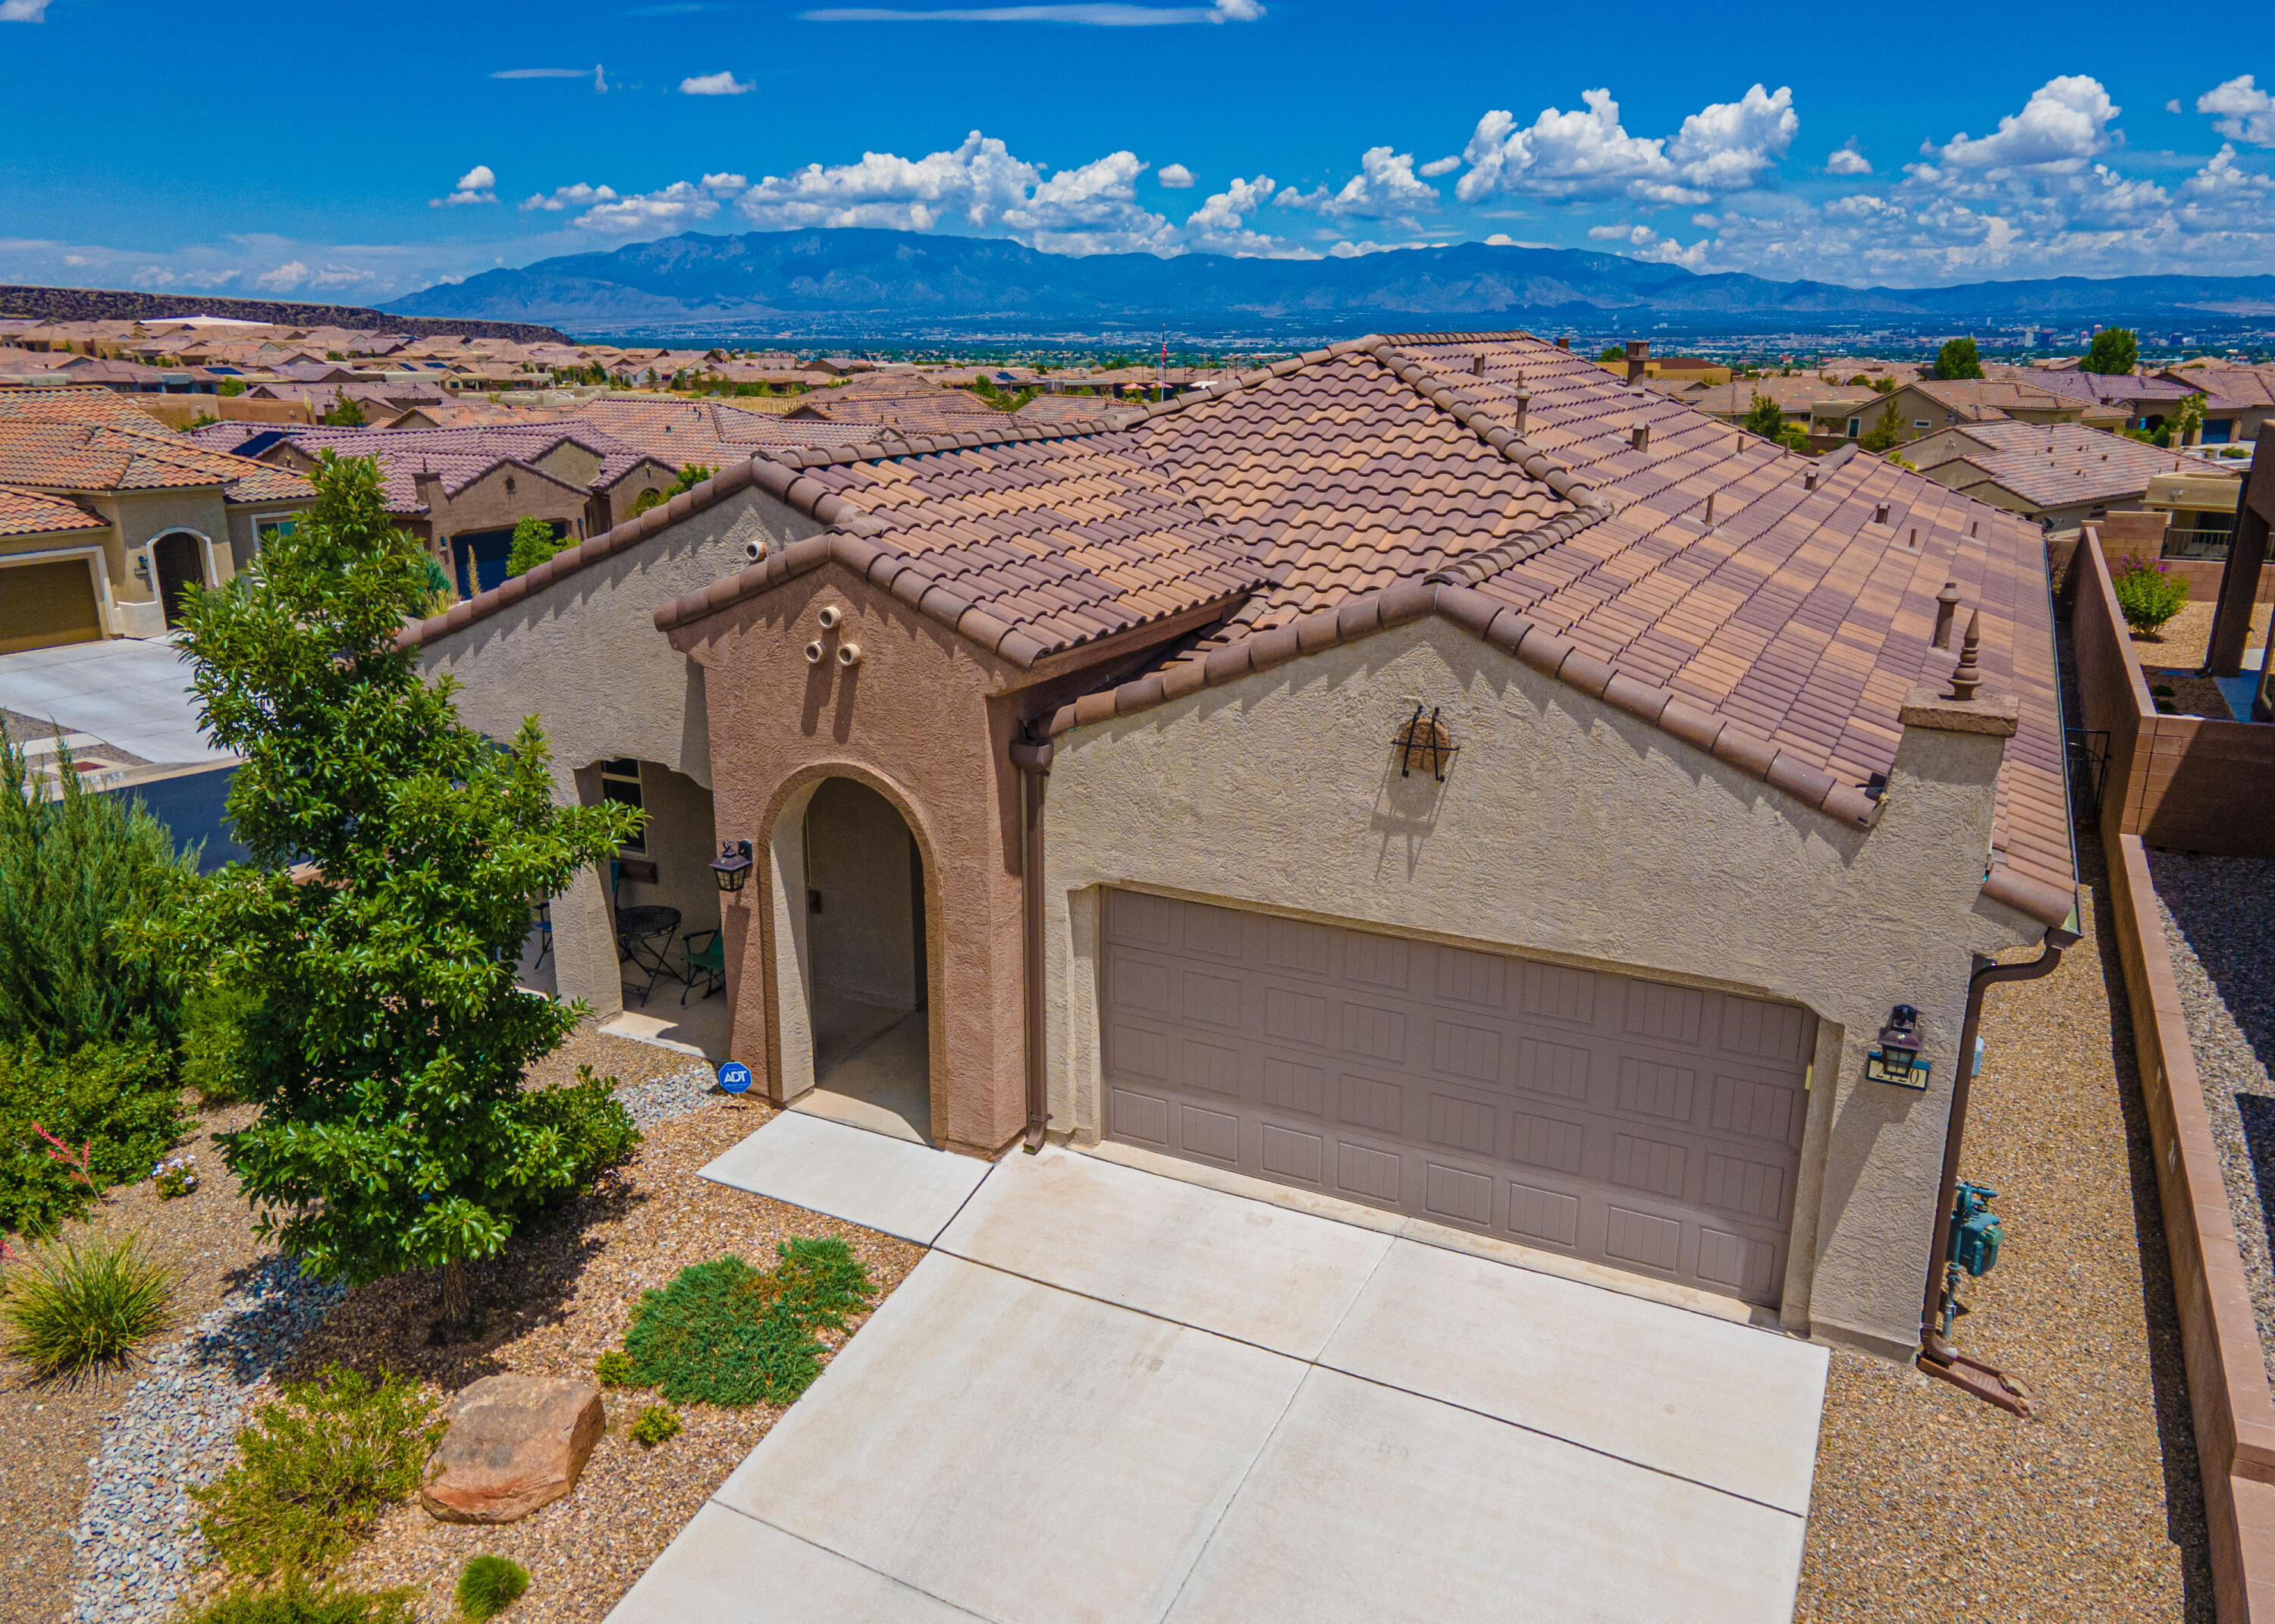 GEORGOUS HOME WITH FOREVER VIEWS LOCATED IN THE EXCLUSIVE COMMUNITY OF DEL WEBB MIREHAVEN!! This 1678SF Home Sits High On a Premium Corner Lot with SPECTACULAR Views of the Sandia and Manzano Mtns and City!!  Home Was Built With Many Upgrades Including:  Beautiful Wood Look Tile Throughout, Tray Ceiling & Bay Window in the Master Bedroom, Bonus Room/Office, Corner Fireplace, Extended Covered Patio, Gas Stub-out, Gas Oven, Kitchen Has 'Chiffon' Cabinetry with 'Desert Accents', Window Blinds, Free Standing Mud Sink In Garage, Custom Storm Door at Front, Gutters & Custom Landscaping!! Home Backs to Open Space!  Backyard Wall is Raised on Each Side and You'll Love the Privacy!! All Appliances Stay!! Enjoy Daily Activities, Pickle Ball, Tennis, Pool, Jacuzzi, etc at the Sandia Amenity Center!!